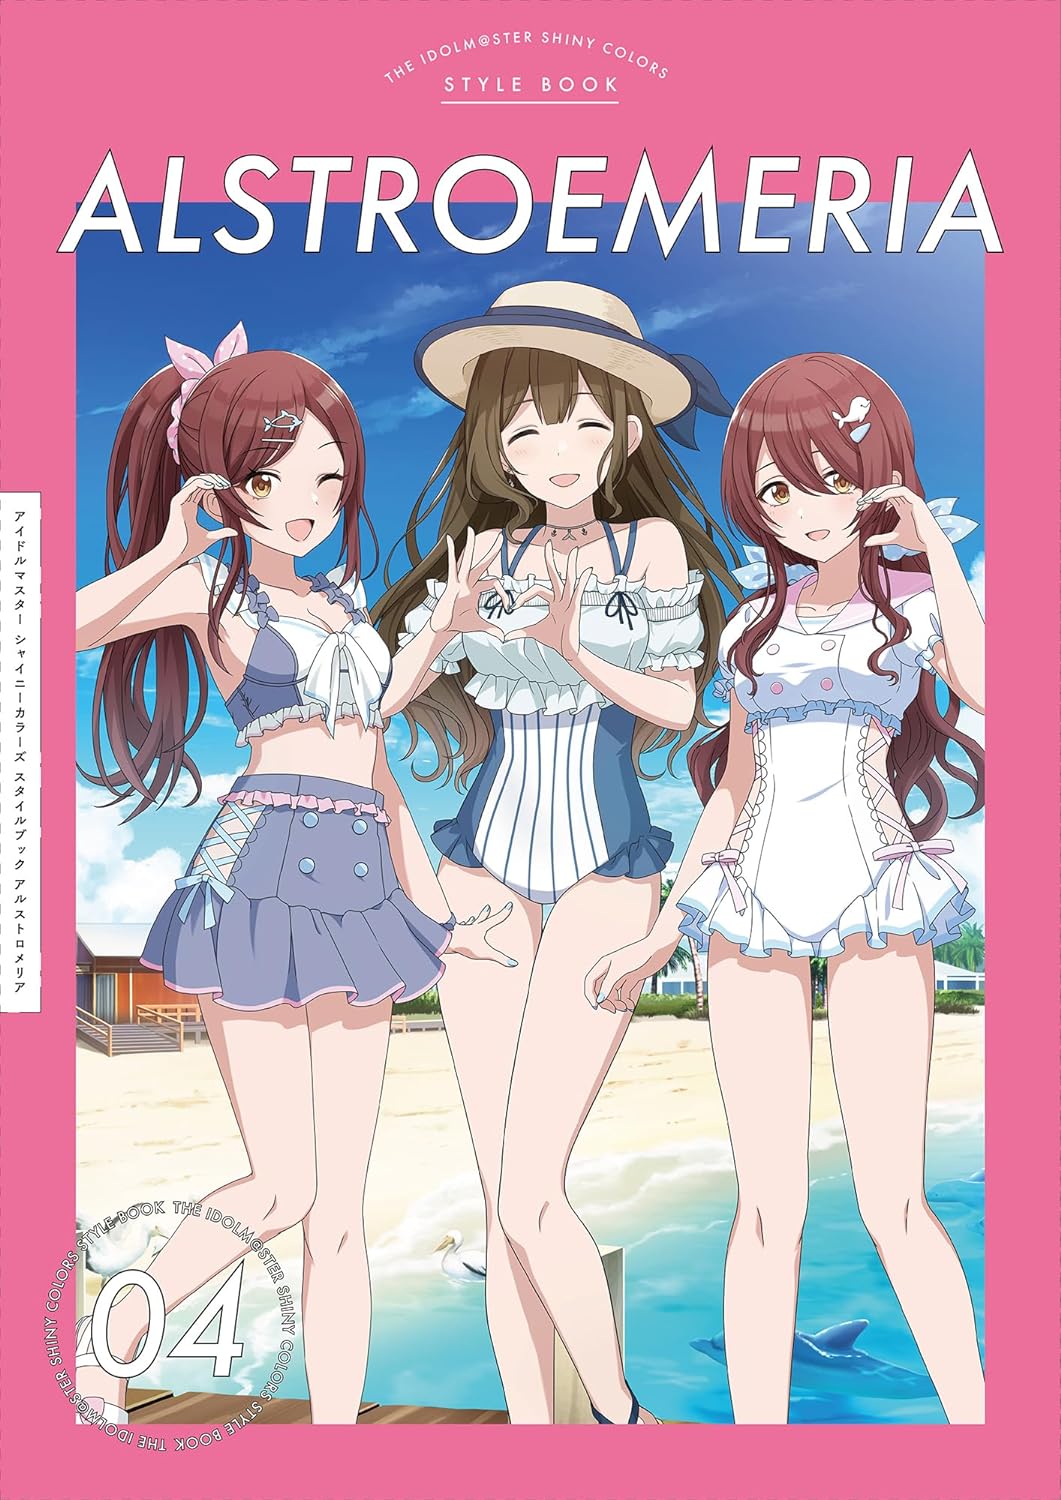 The Idolmaster Shiny Colors Style Book Alstroemeria W/CD